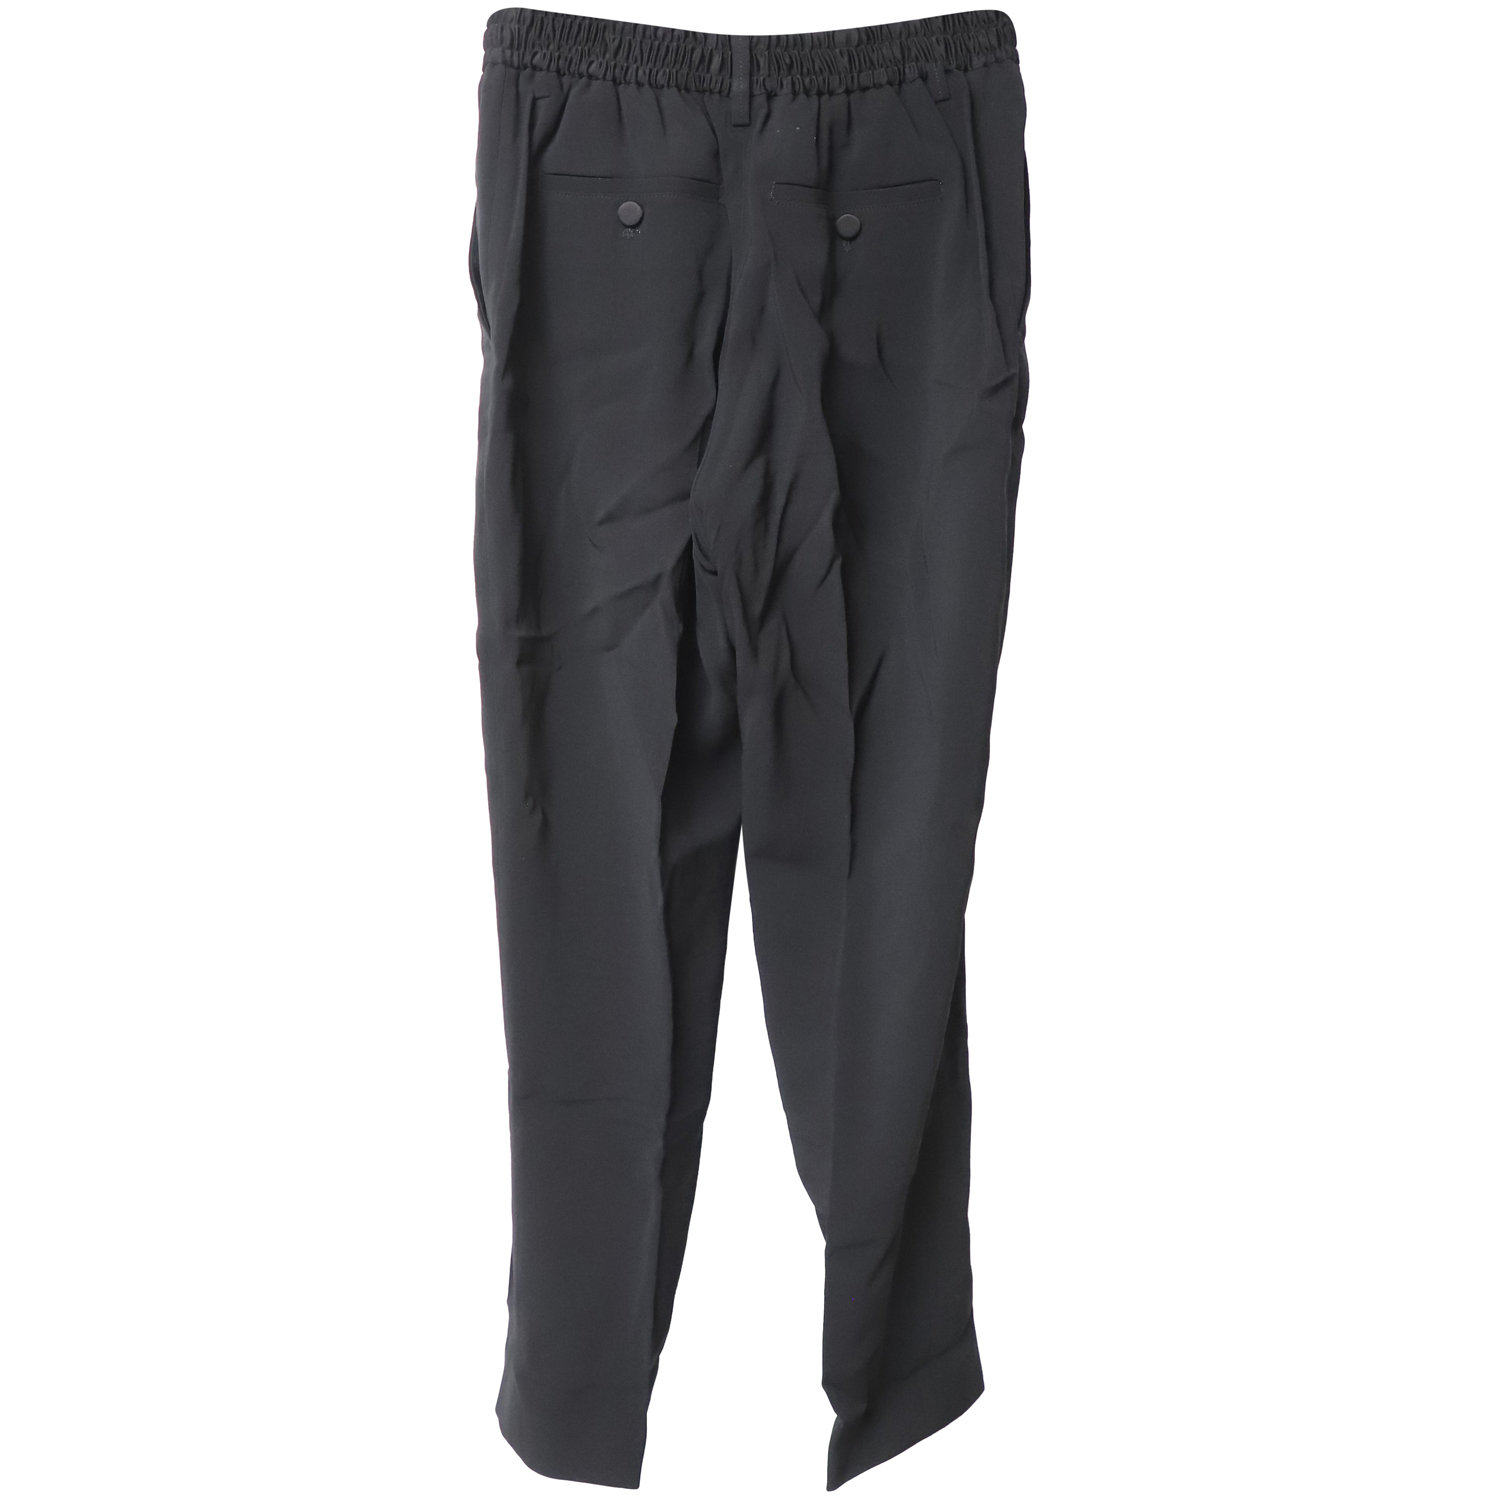 Refined Black Trouser Pants with Tapered Silhouette